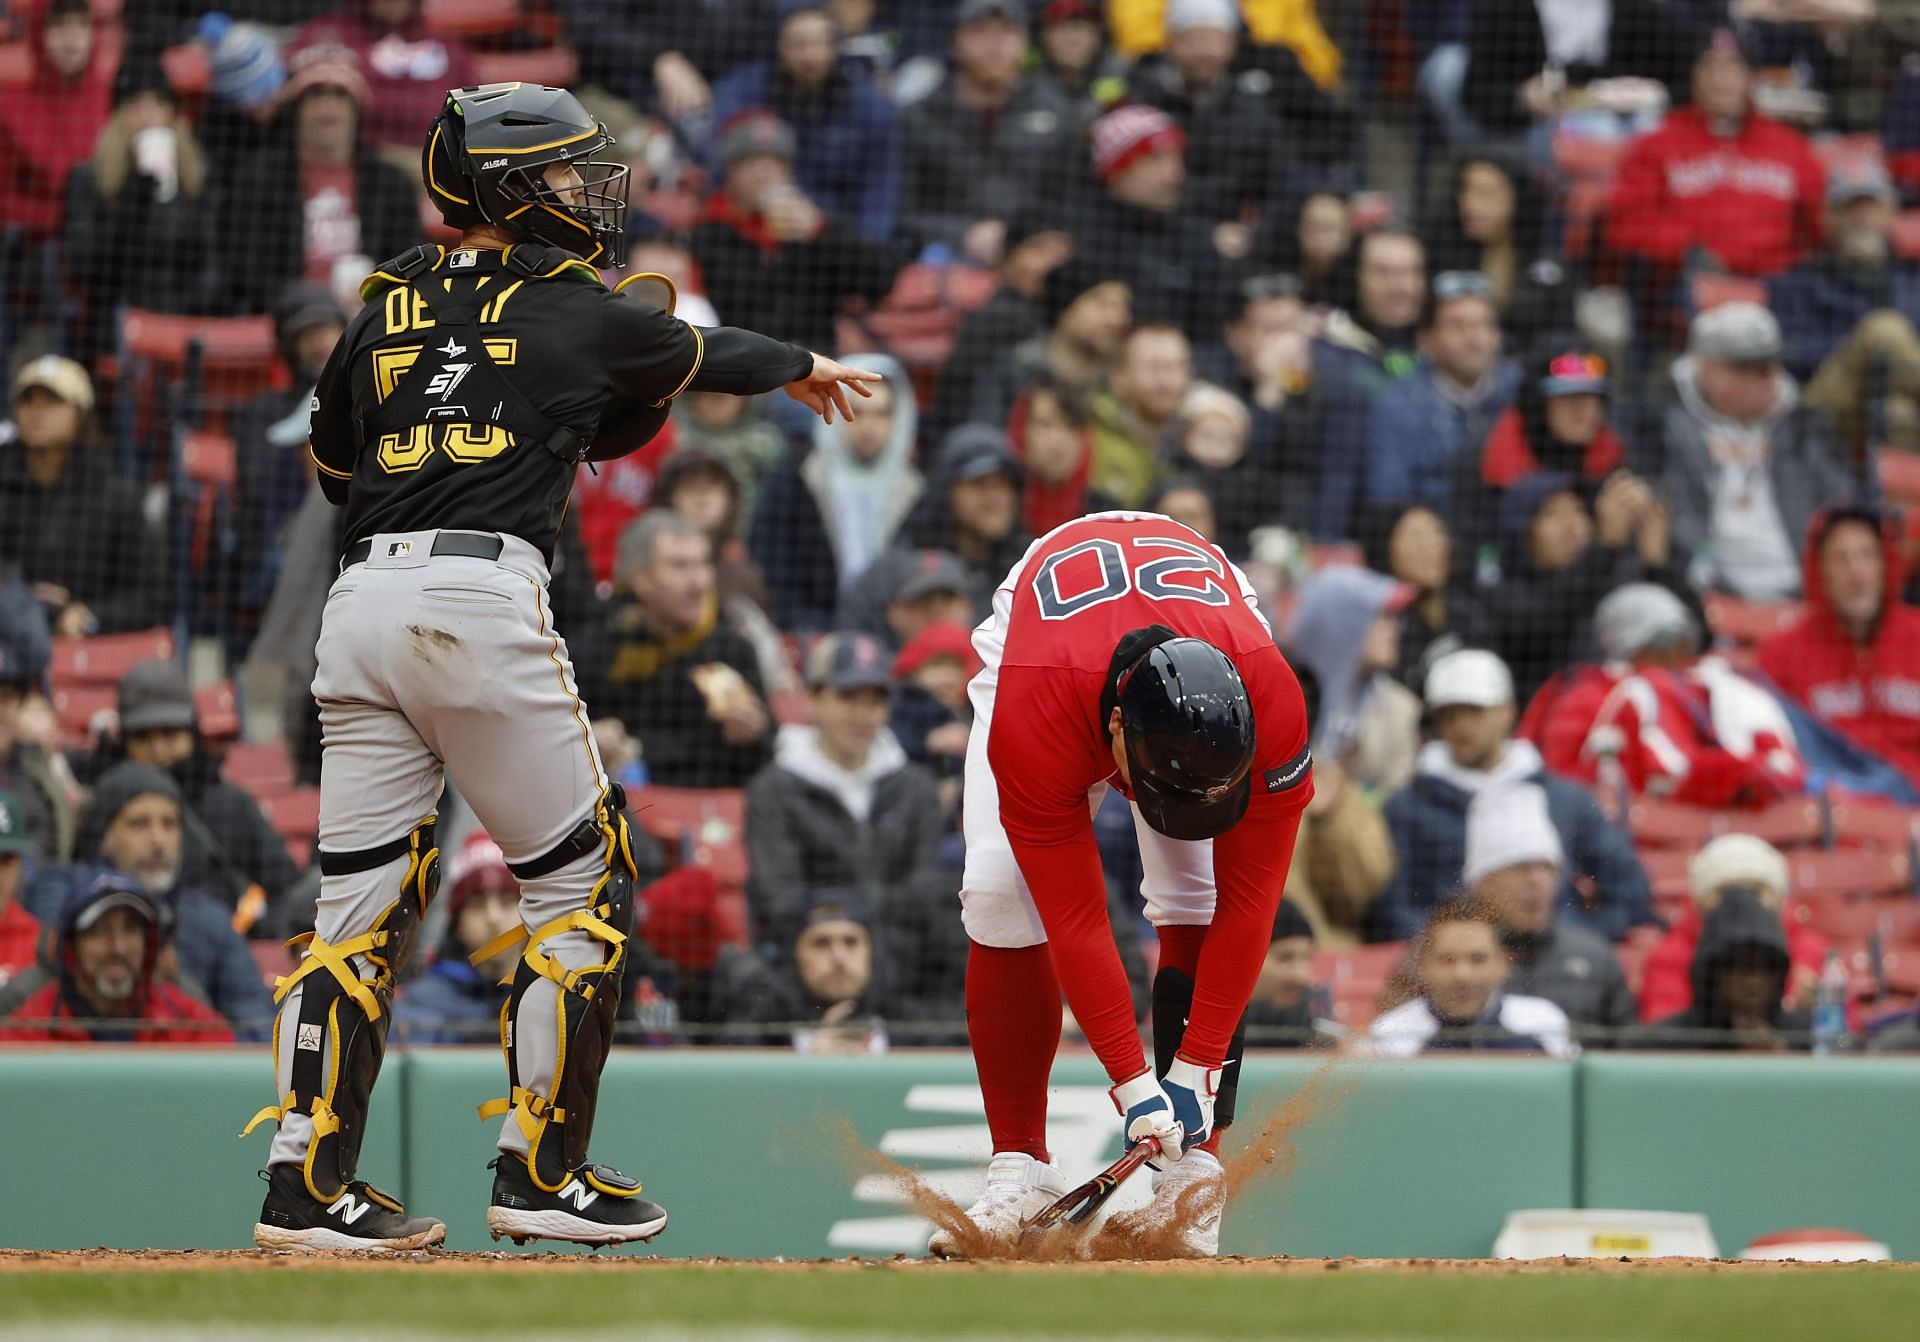 As catcher Jason Delay of the Pittsburgh Pirates throws the ball down to third, Yu Chang of the Boston Red Sox slams his bat into the dirt following a strikeout.